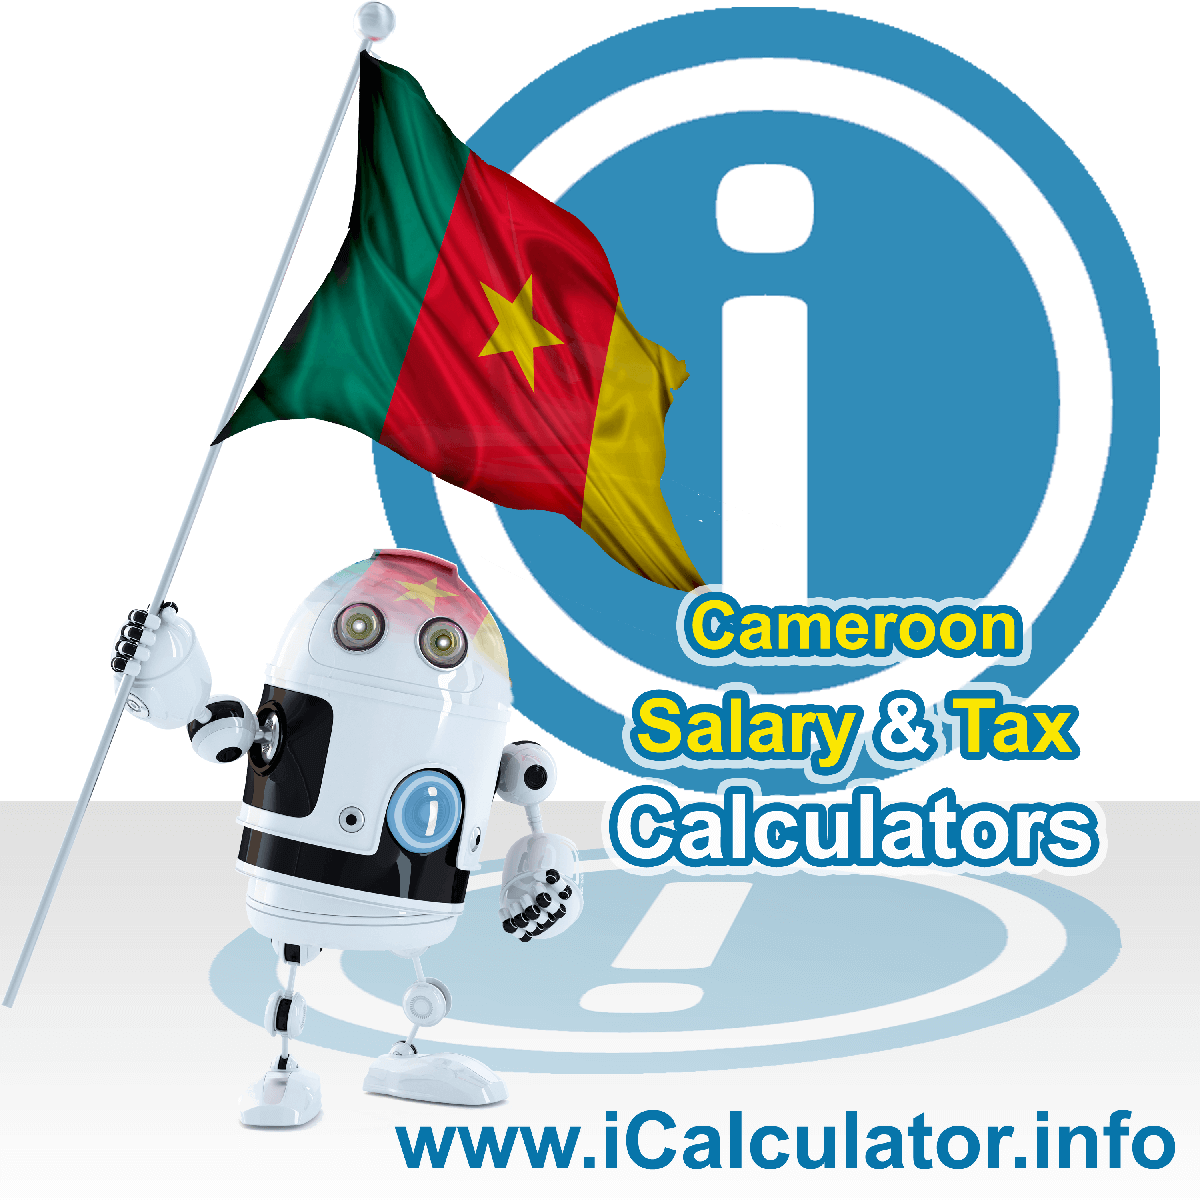 Cameroon Tax Calculator. This image shows the Cameroon flag and information relating to the tax formula for the Cameroon Salary Calculator